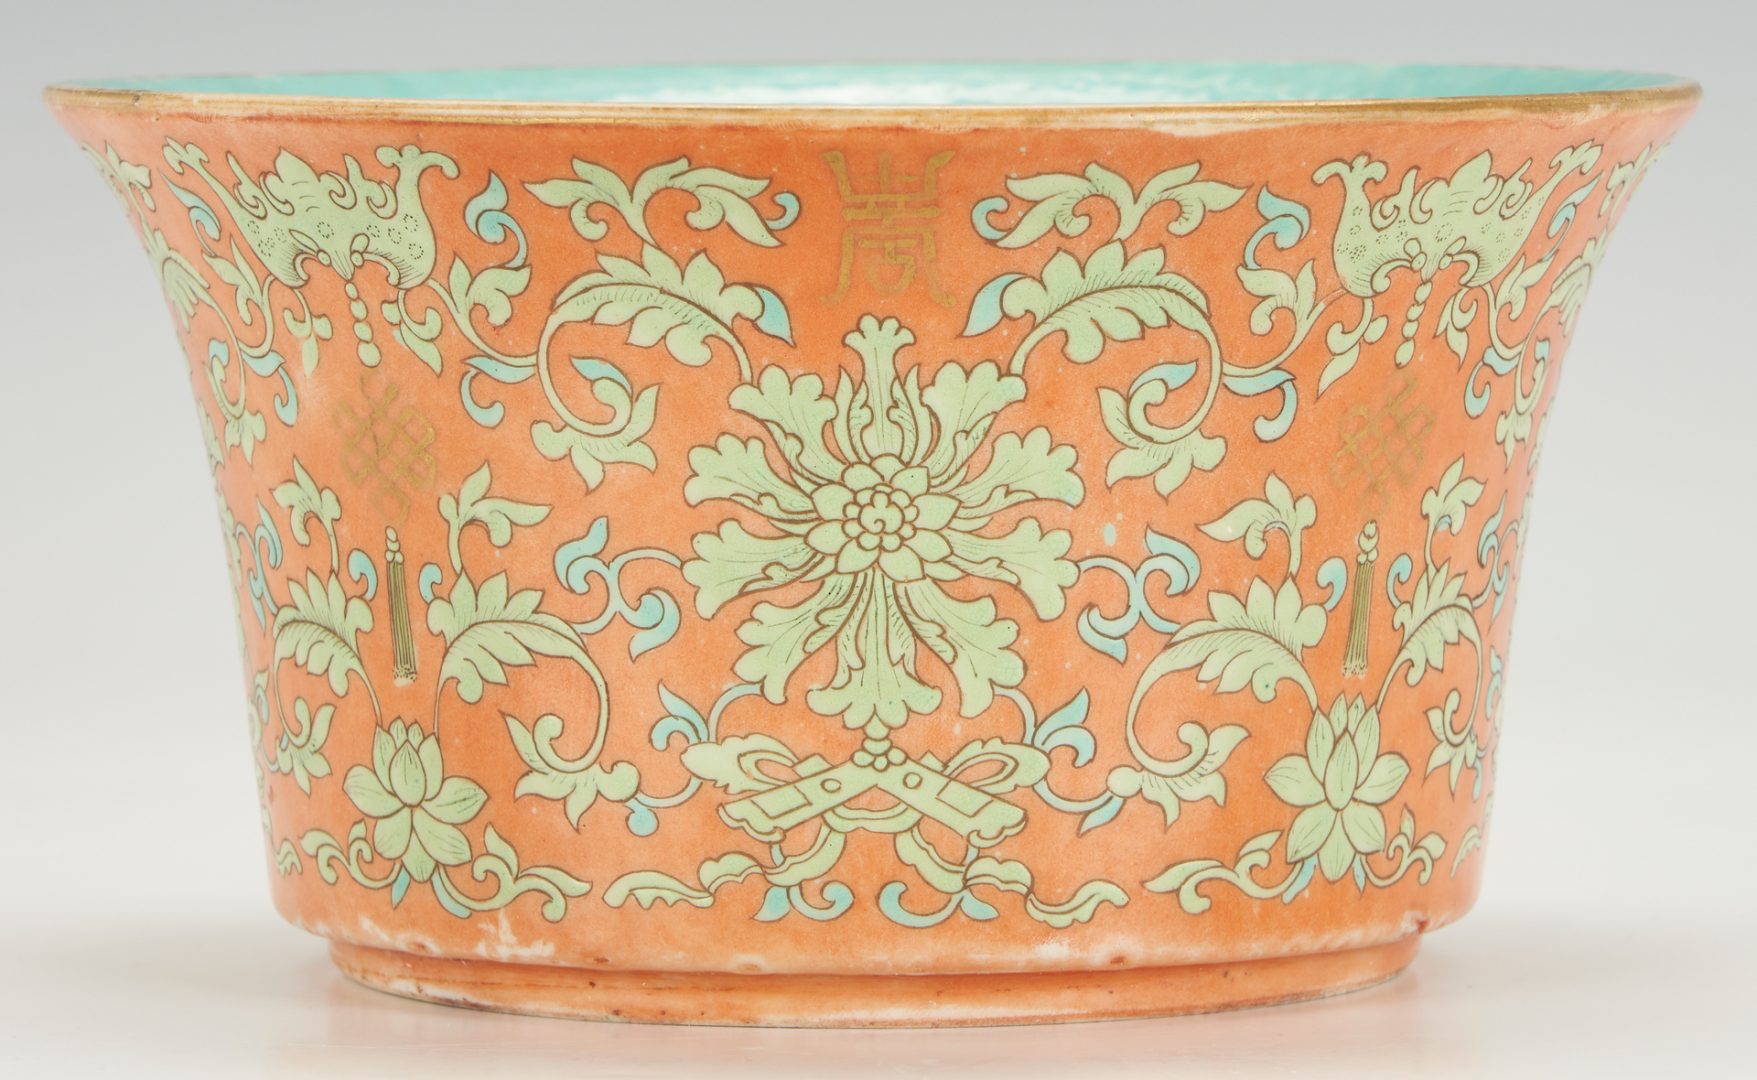 Lot 18: Two (2) Chinese Turquoise Glazed Bowls, incl. Immortals